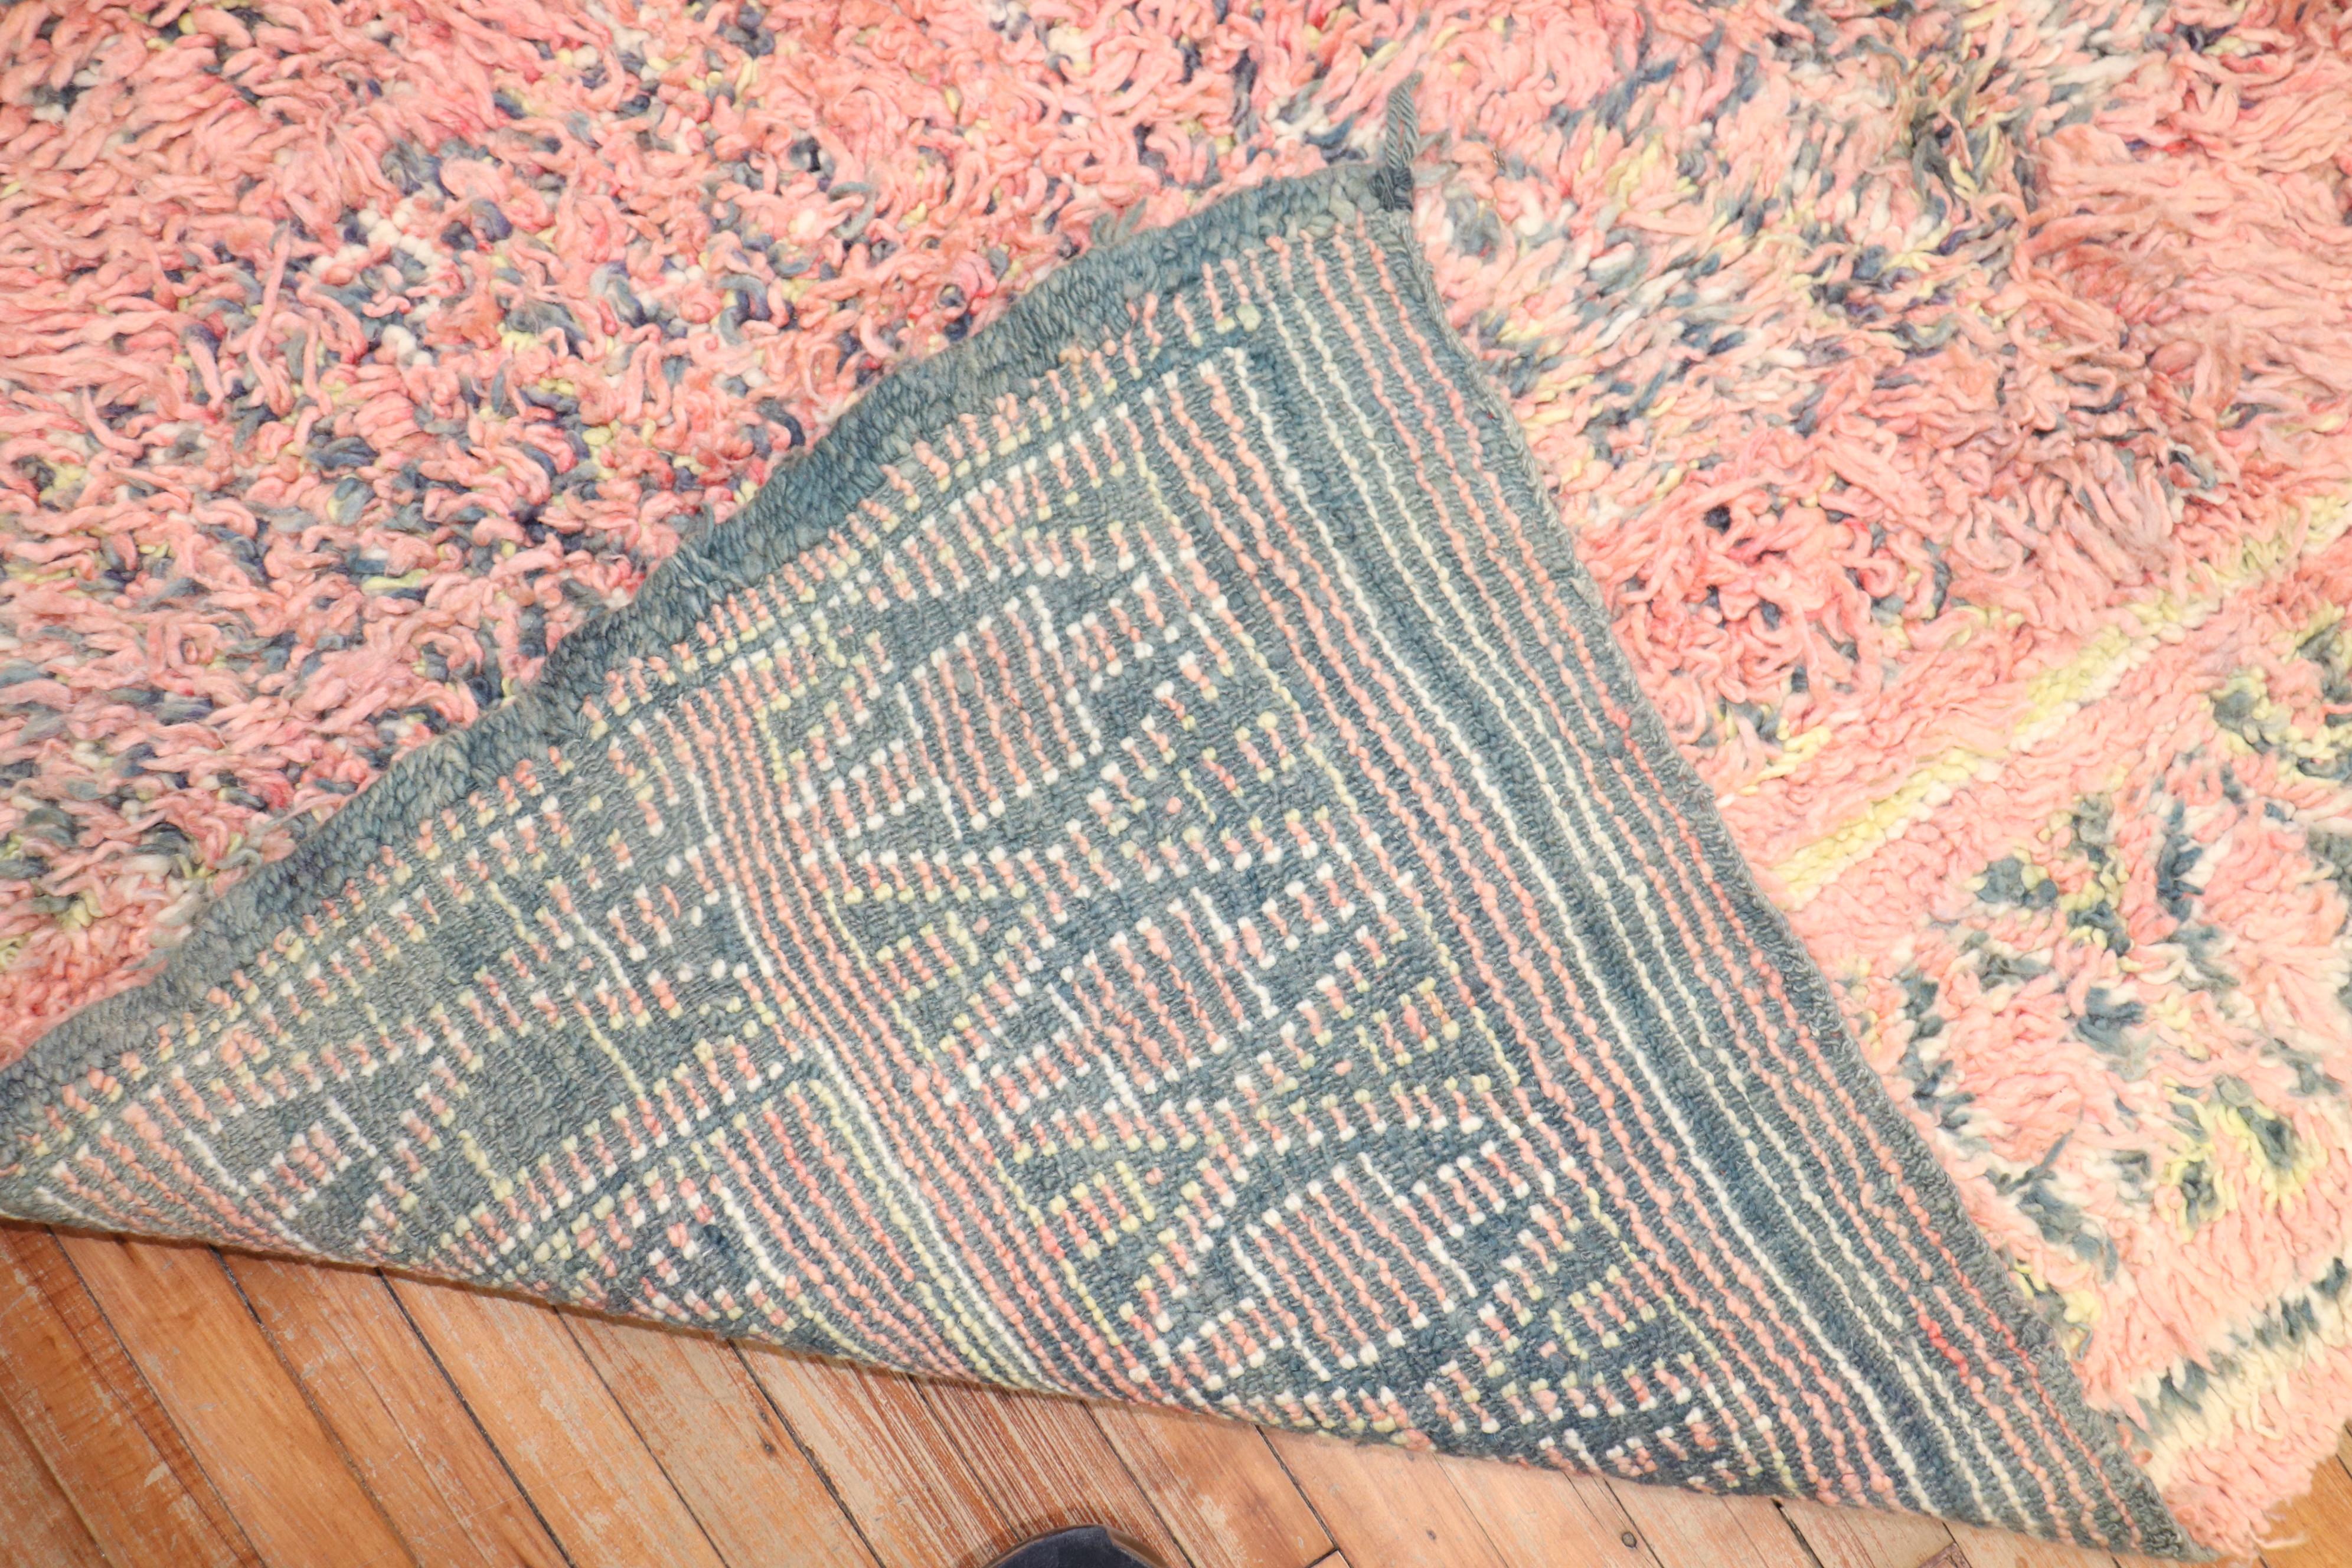 A 3rd quarter of the century One of a kind Moroccan Rug in bright pink and yellow.
Bohemian at its finest!

Size: 6'6'' x 9'1